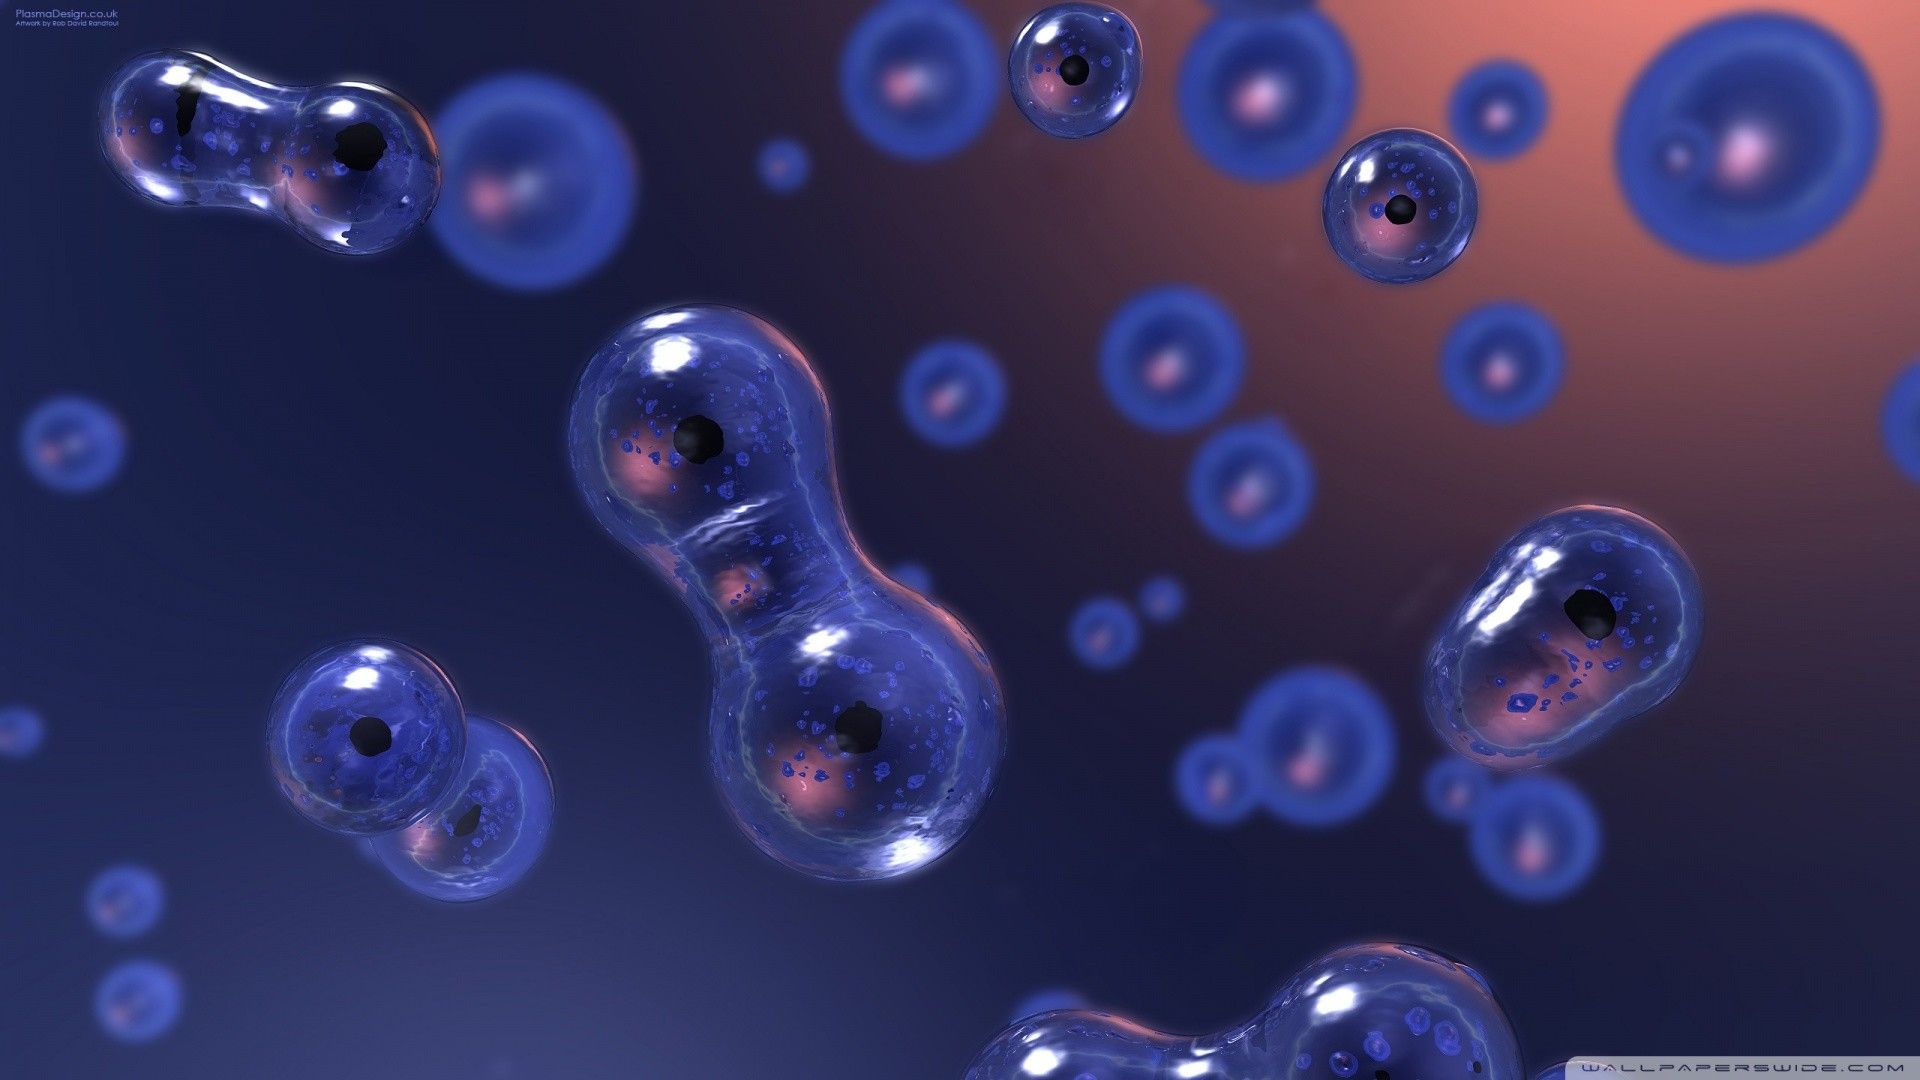 A group of blue cells floating in the air - Science